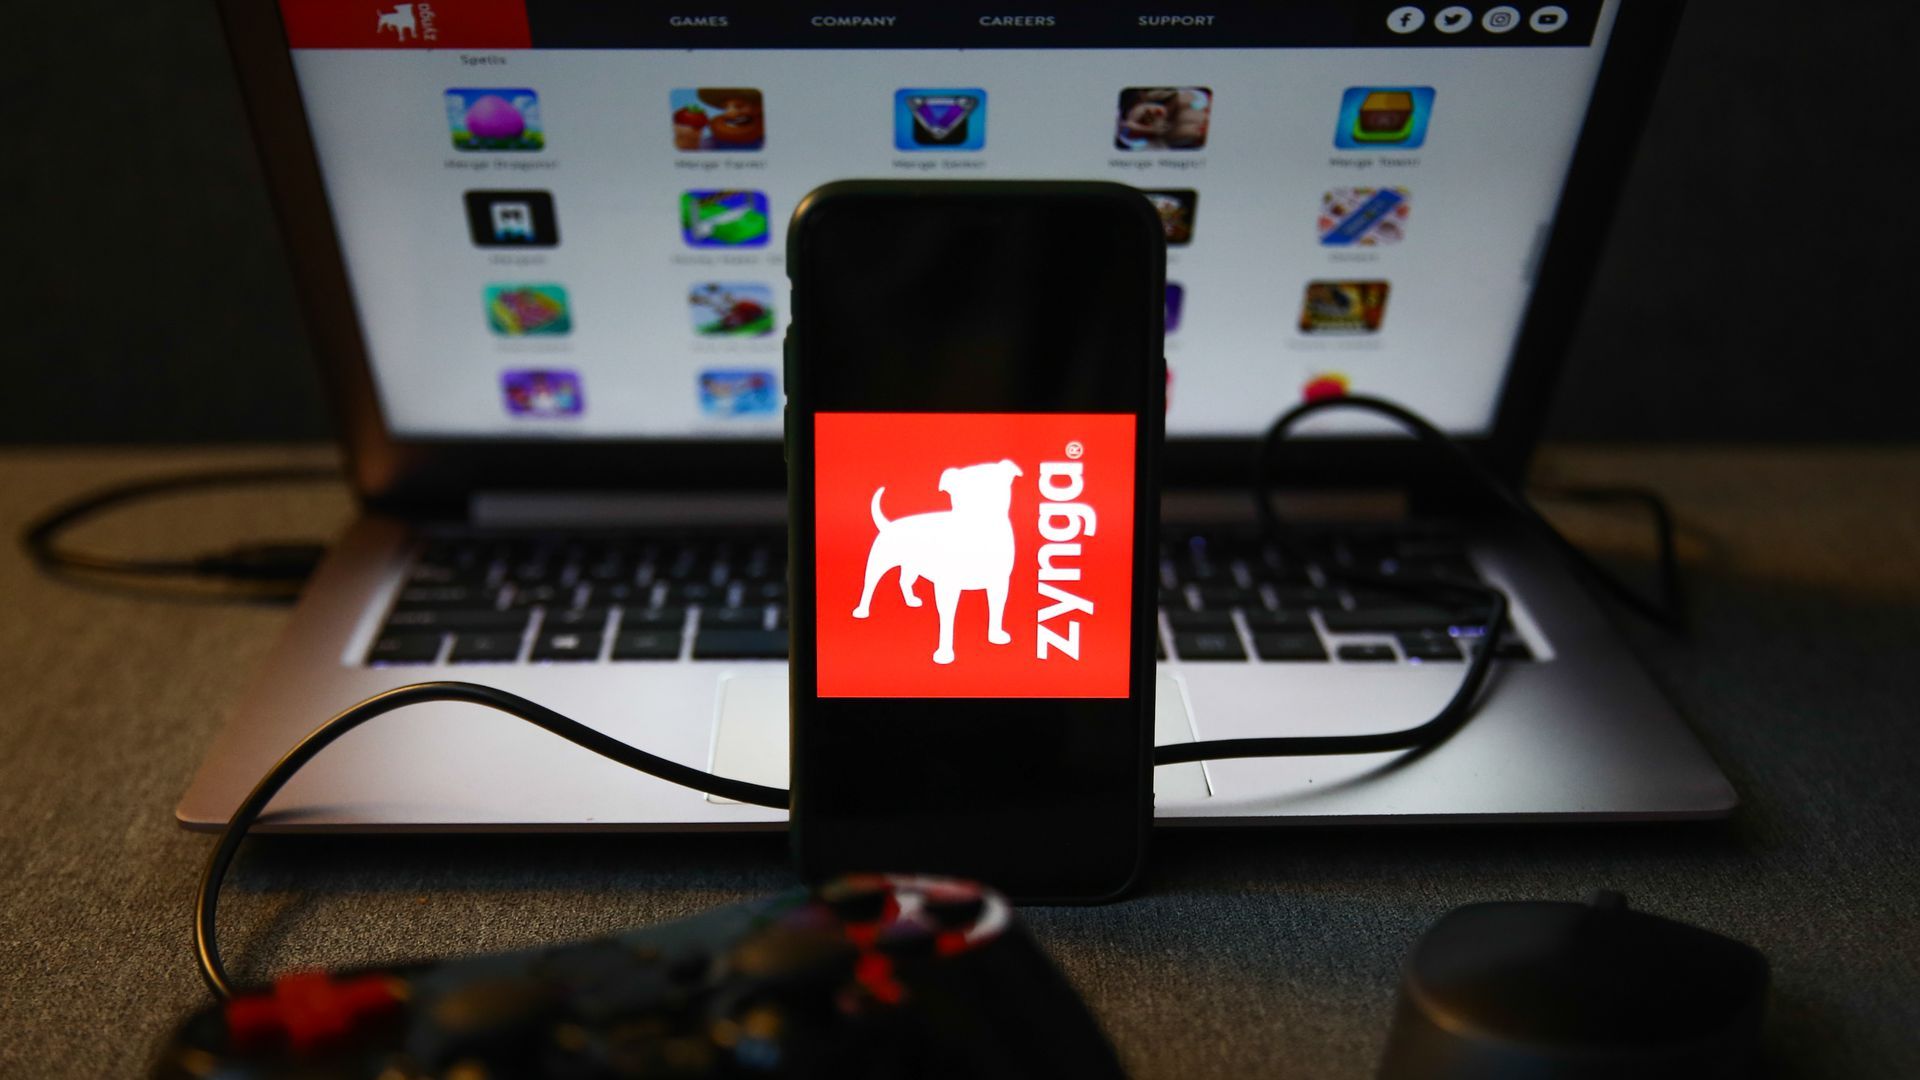 A photo Illustration of the Zynga logo on a smartphone in front of a Mac with the Zynga website